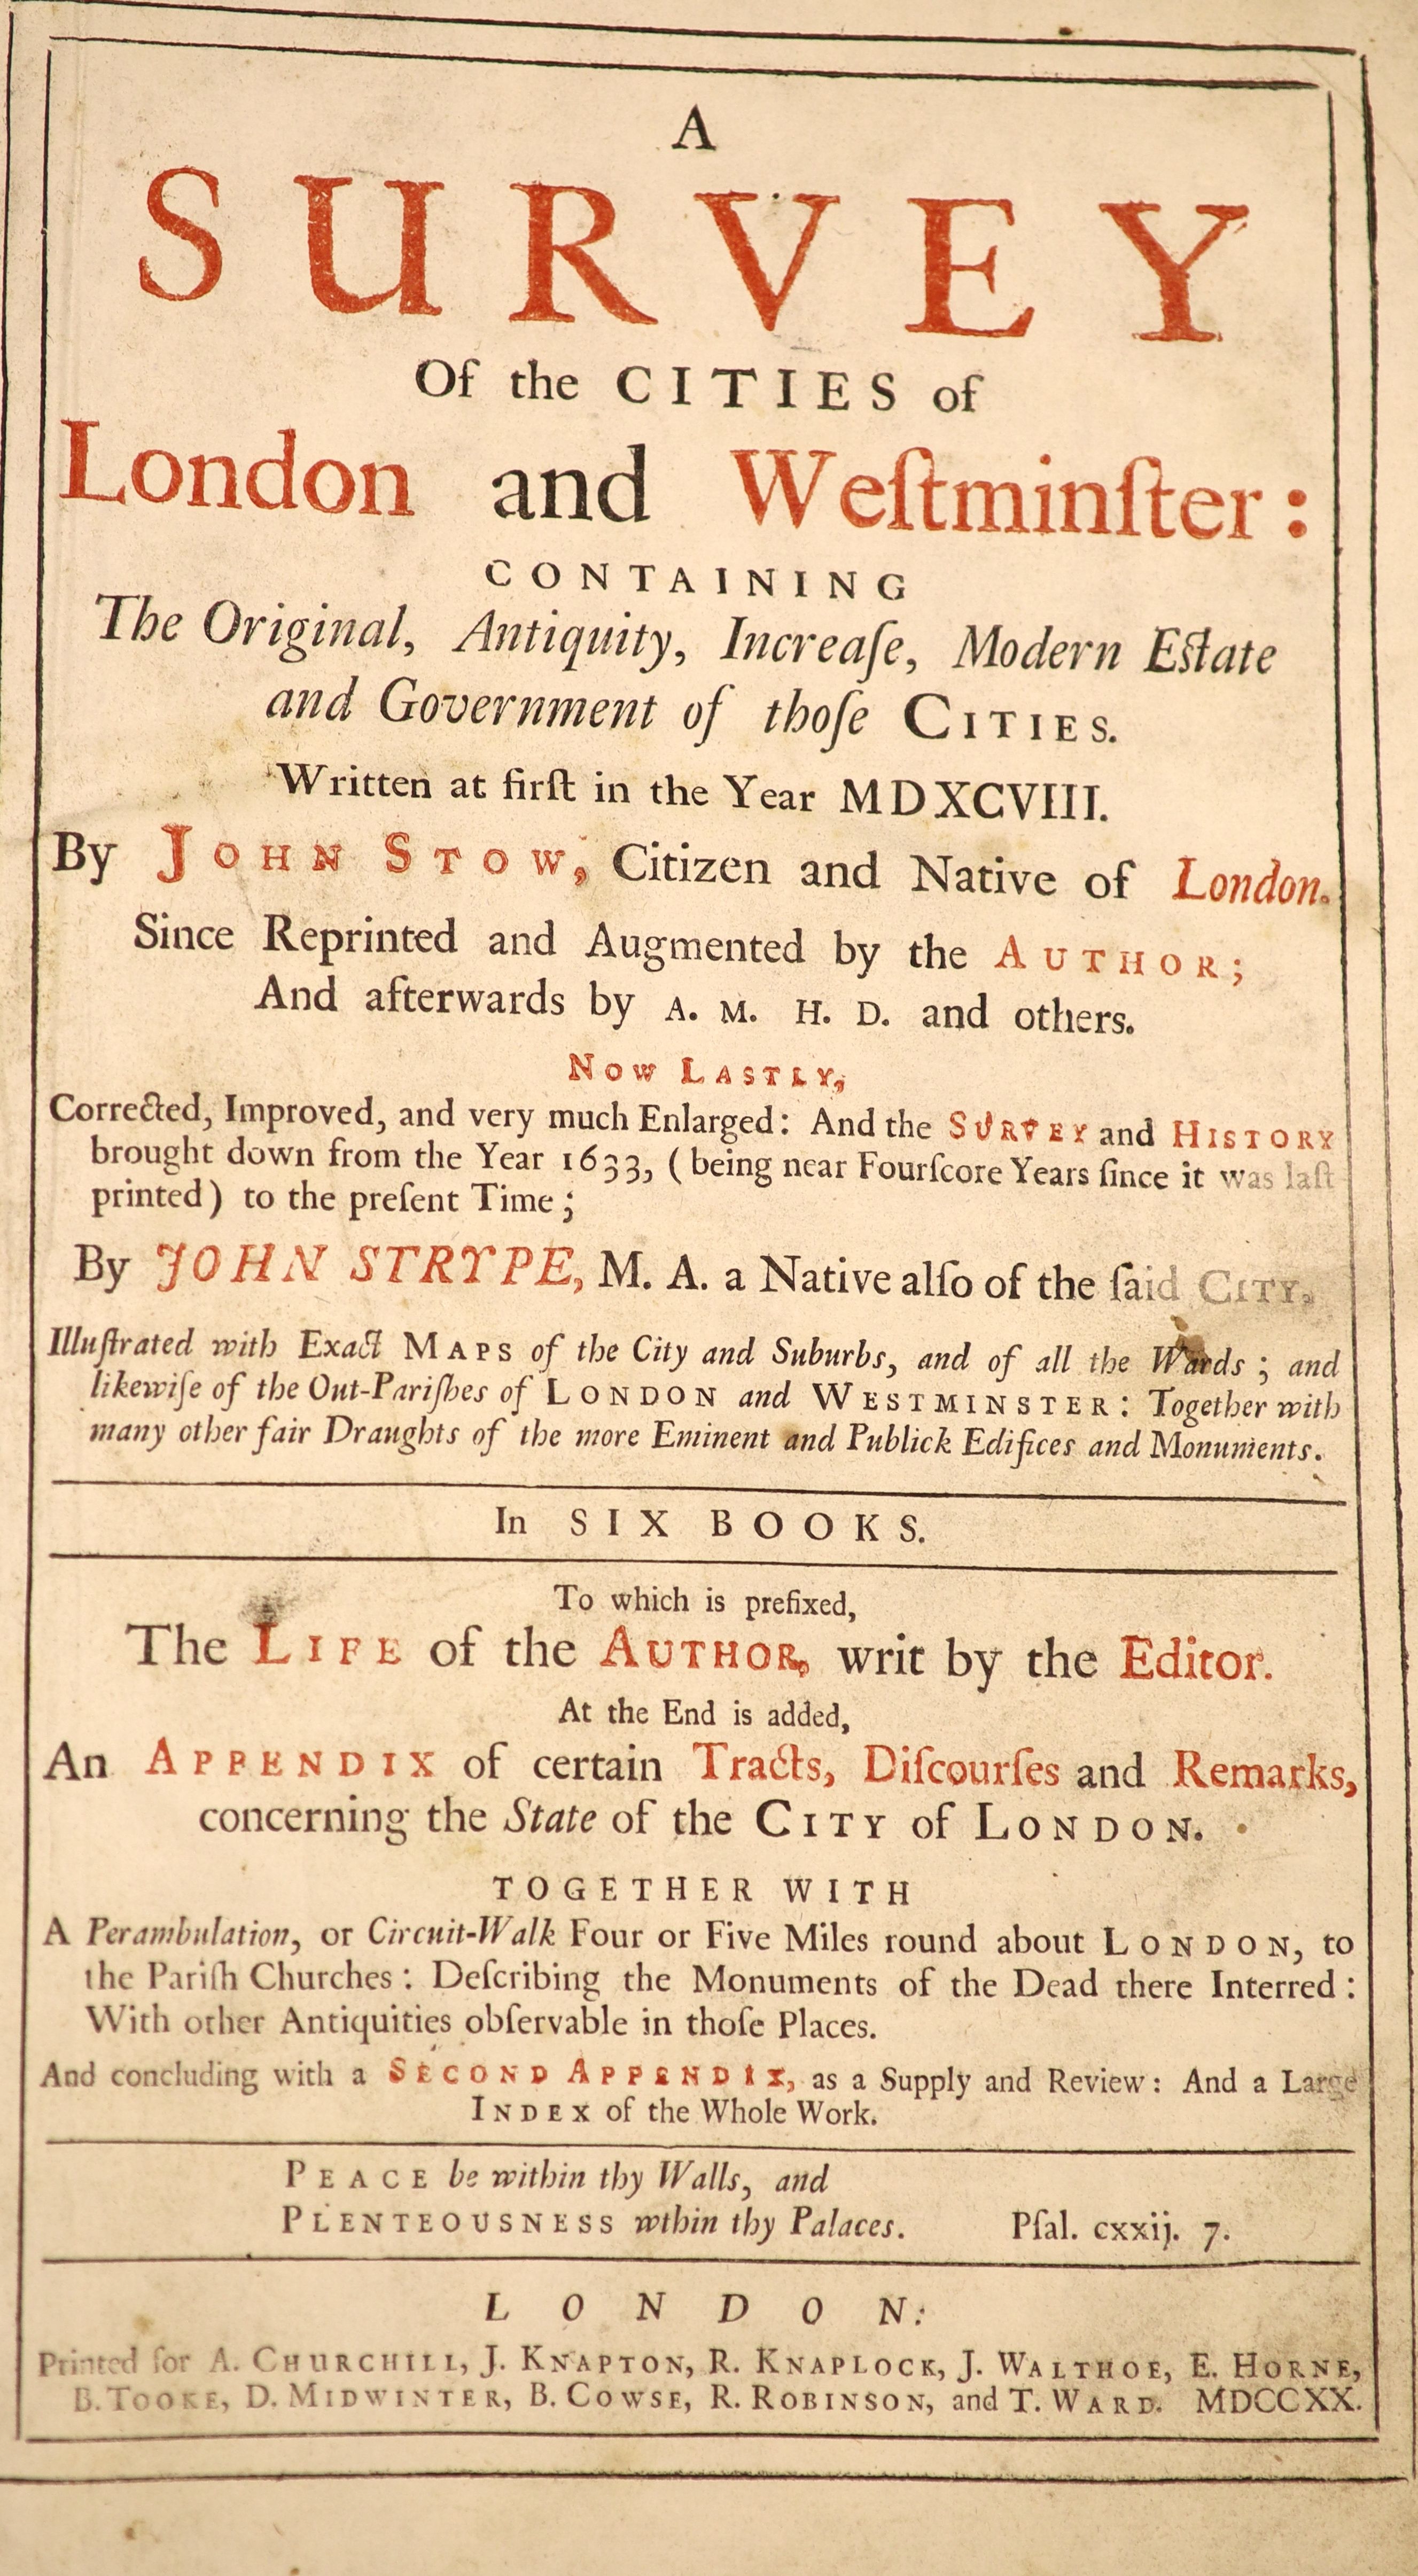 Stow, John - A Survey of the Cities of London and Westminster ... Written at first in the year MDXCVIII... Now lastly, corrected, improved, and very much enlarged ... by John Strype .. to which is prefixed